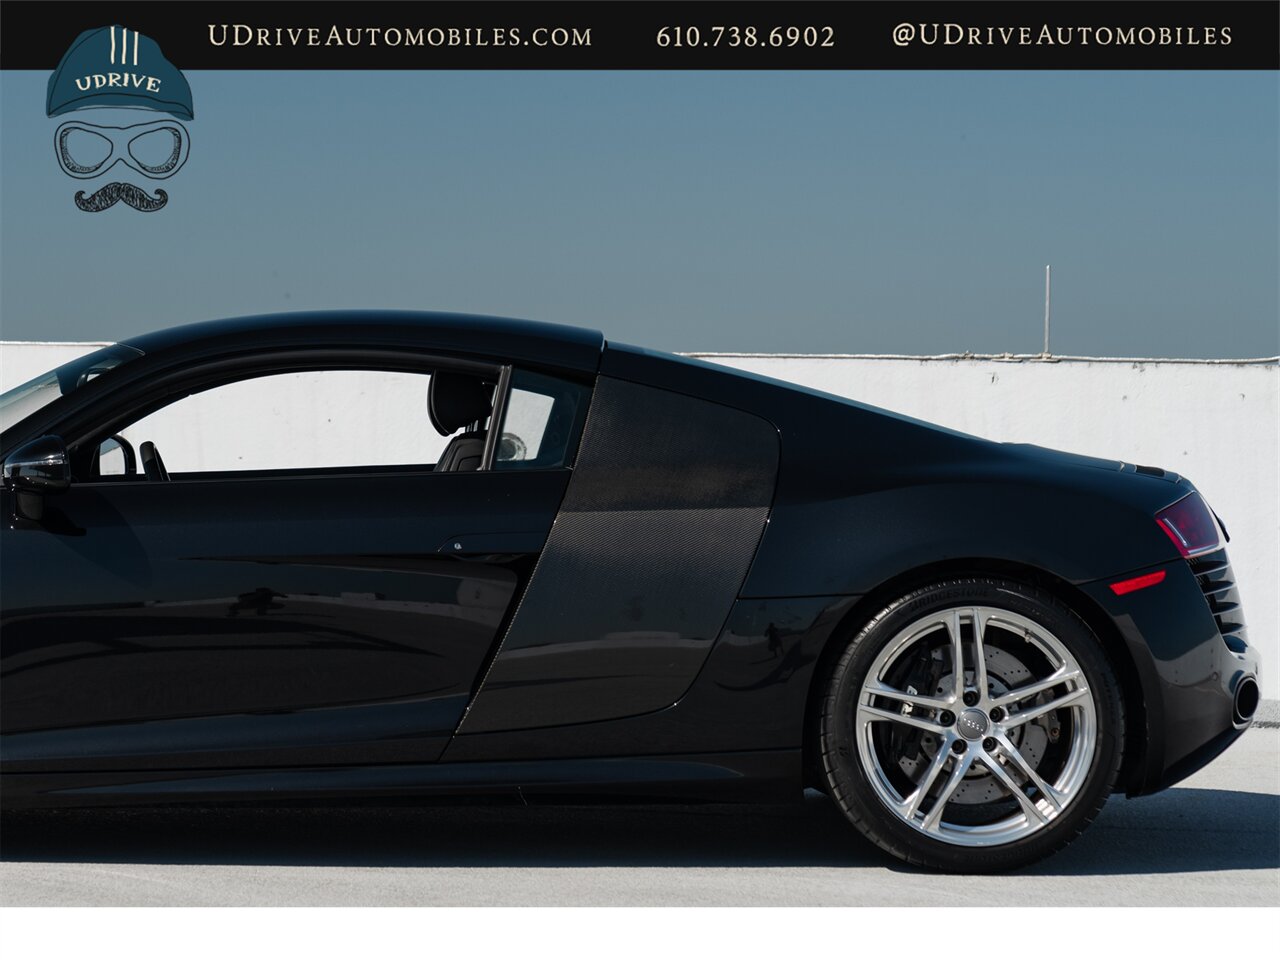 2009 Audi R8 Quattro  4.2L V8 6 Speed Manual - Photo 24 - West Chester, PA 19382